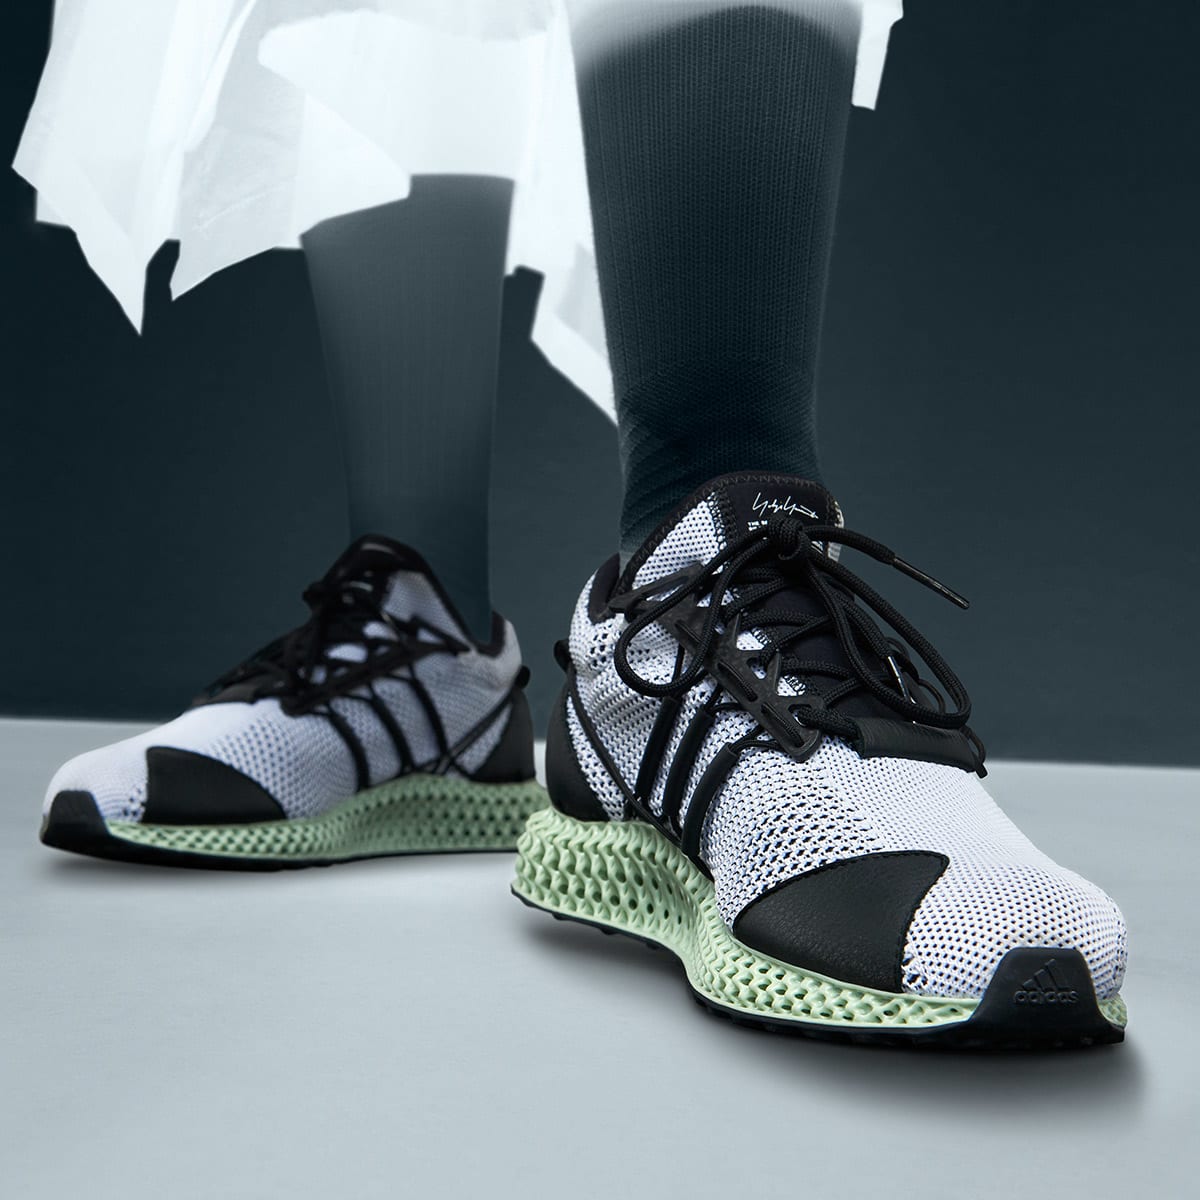 Y-3 Runner 4D (Black & White) | END. Launches